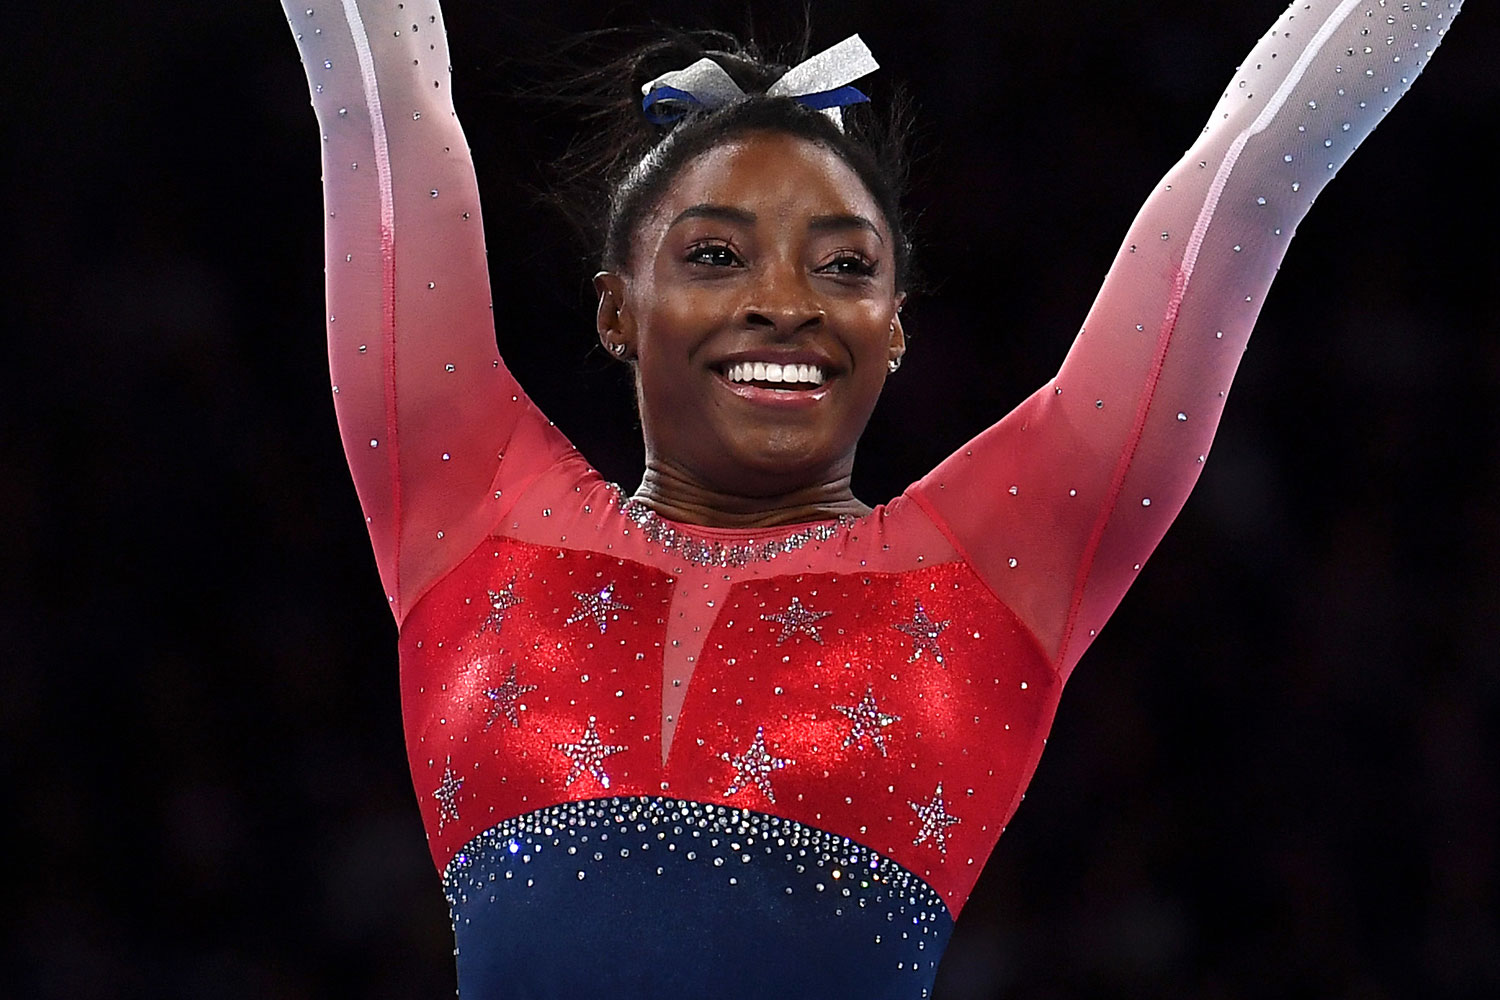 US Olympian Simone Biles Just Became The Most Decorated Female Gymnast In History